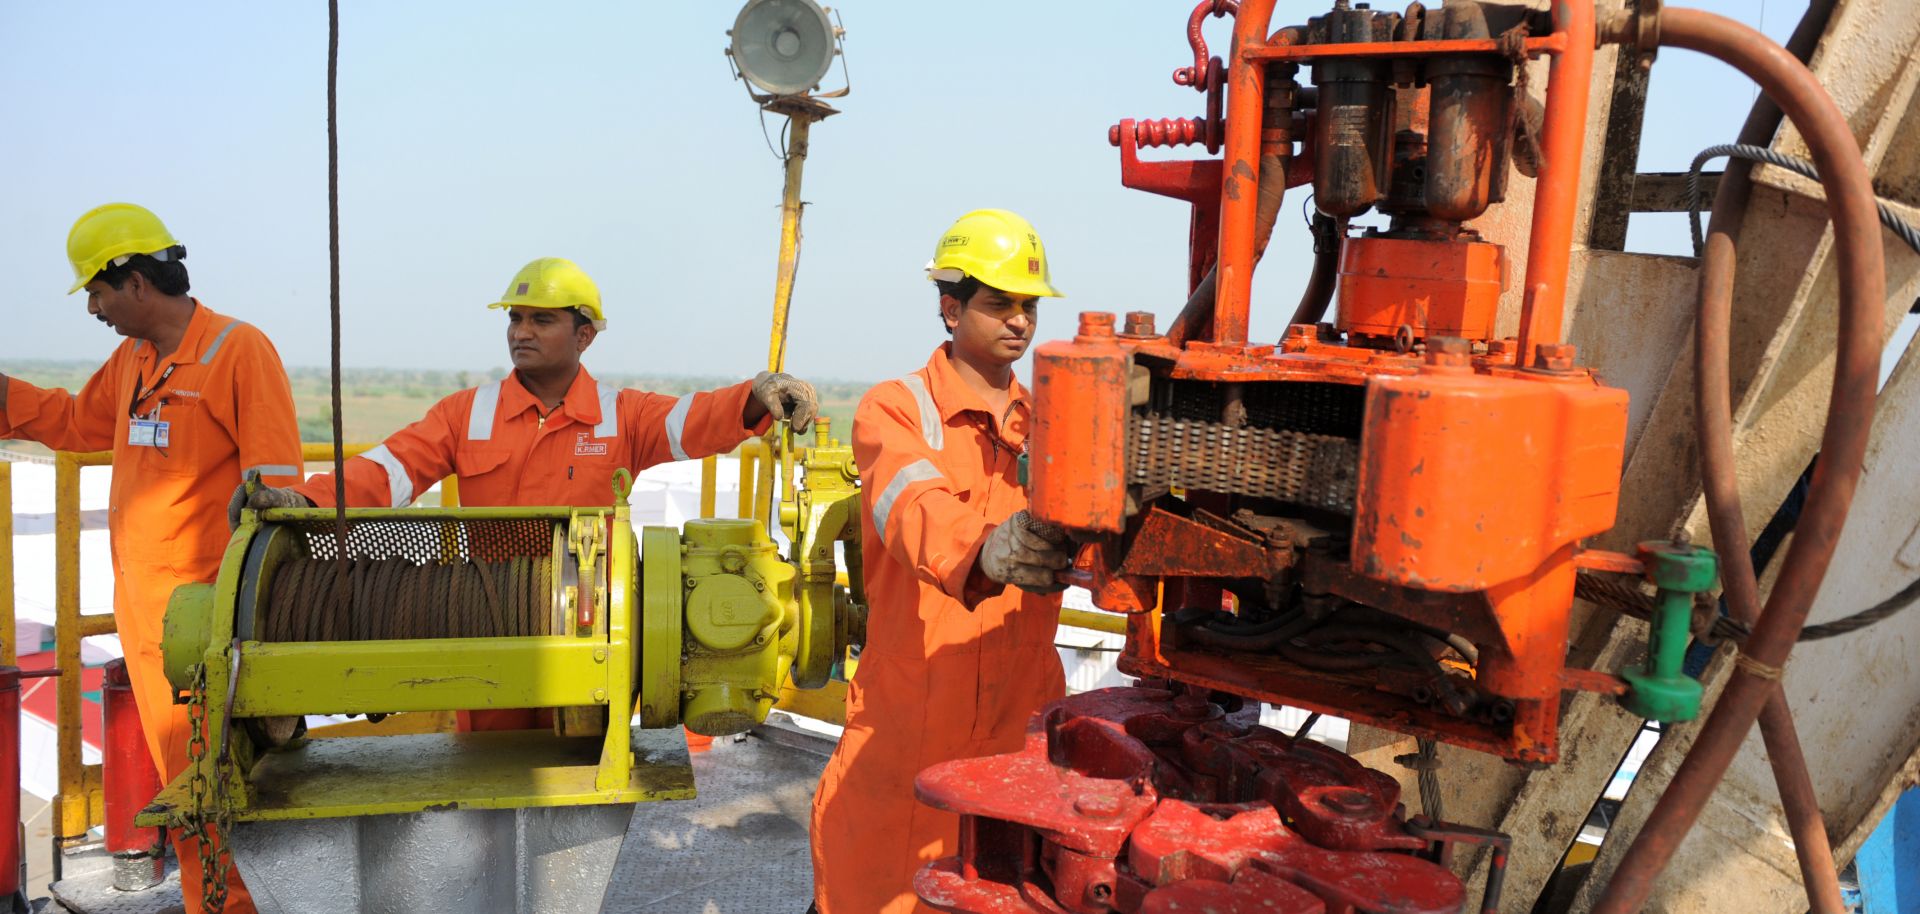 Indian technicians work on the country's first shale-gas exploratory well at ONGC Ankleshwar Asset near Jambusar, 2013.